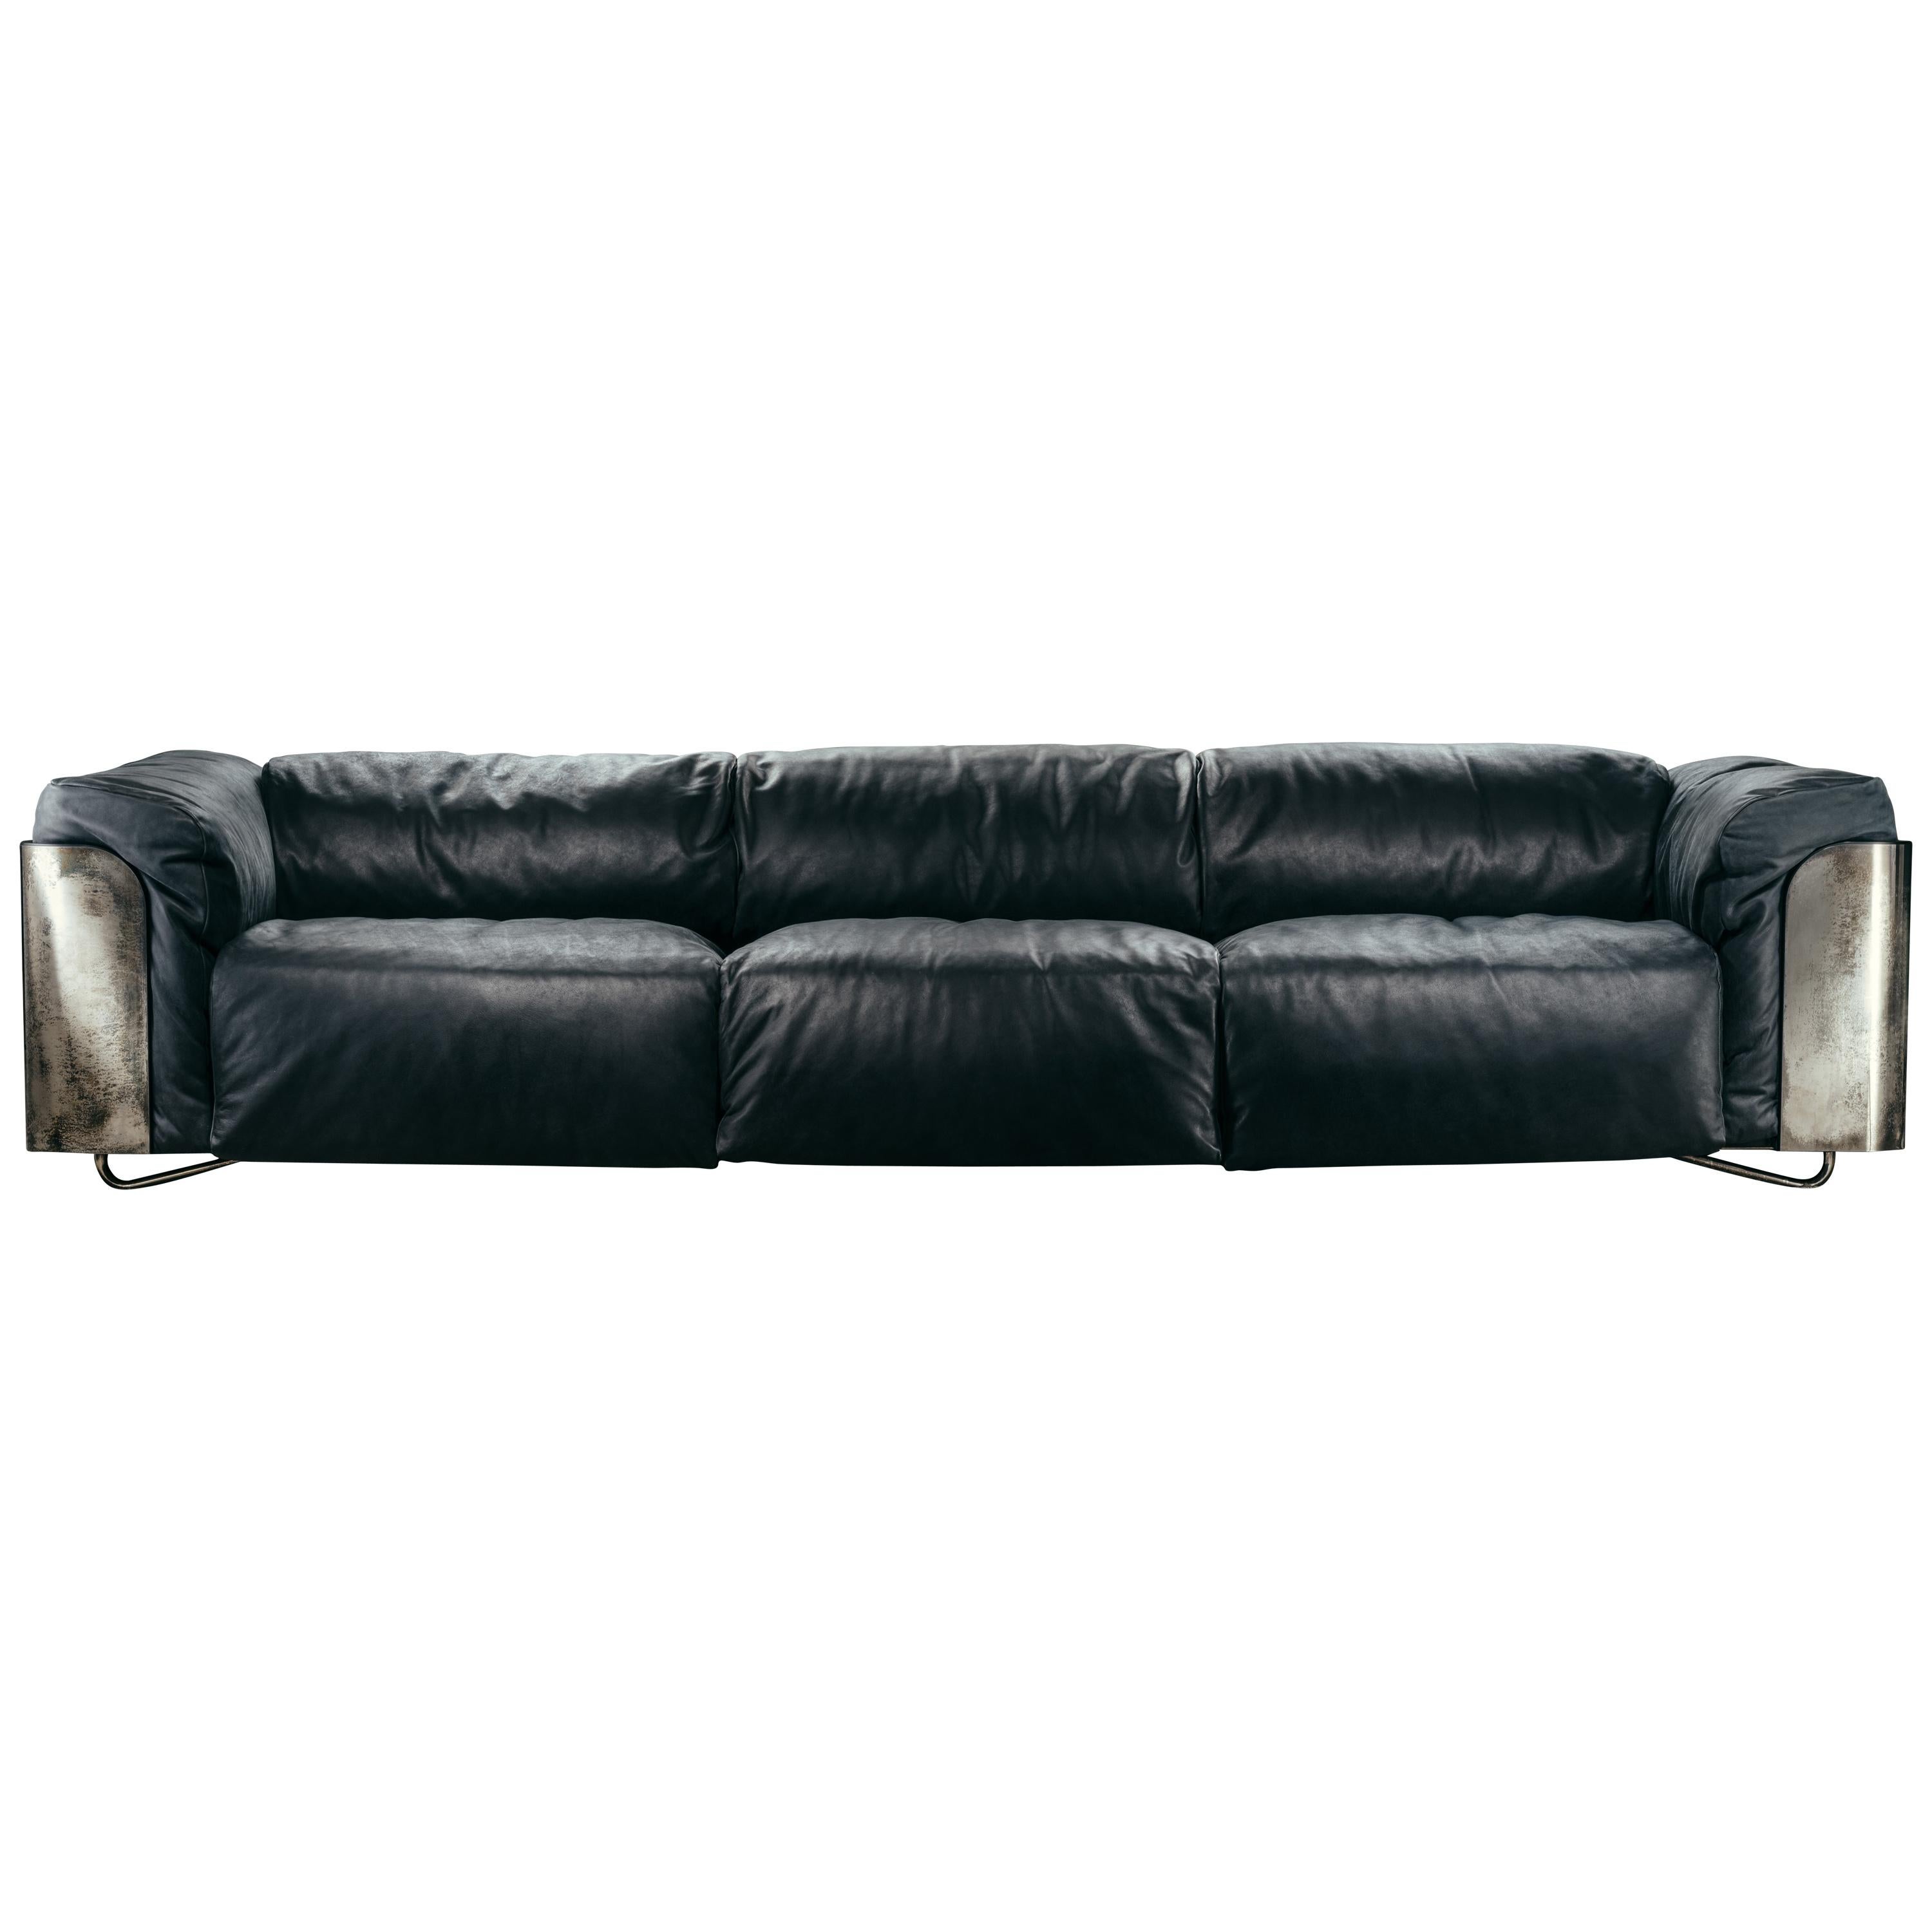 Saint-germain sofa, available in 2 or 3-seater versions, is composed of a matt black wood panel, covered in the external part with a metal plating, with a padded border in the same upholstery of the seating, otherwise in matte black wood. The